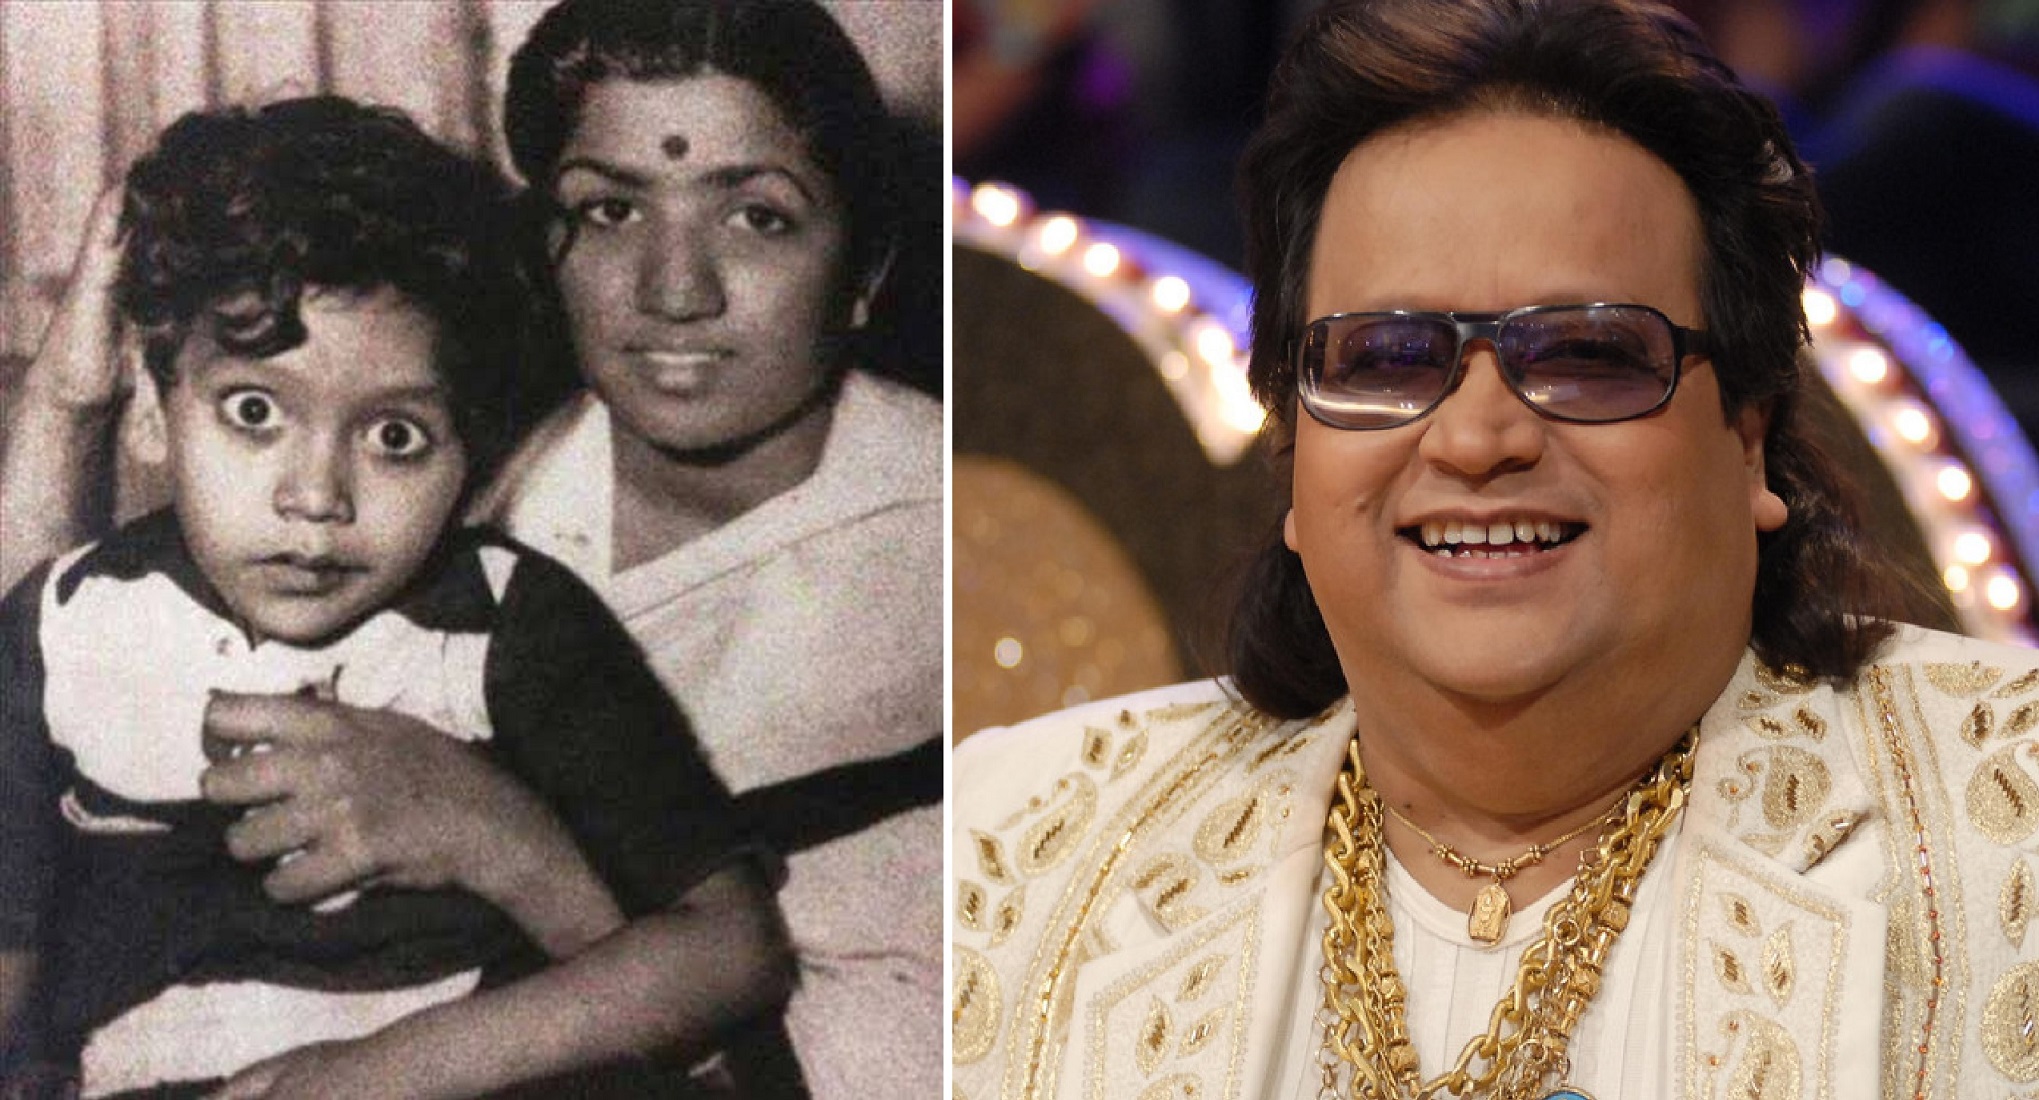 Lata Mangeshkar Shares Old Picture Of Bappi Lahiri Sitting On Her Lap, To Wish Him On His 69th Birthday